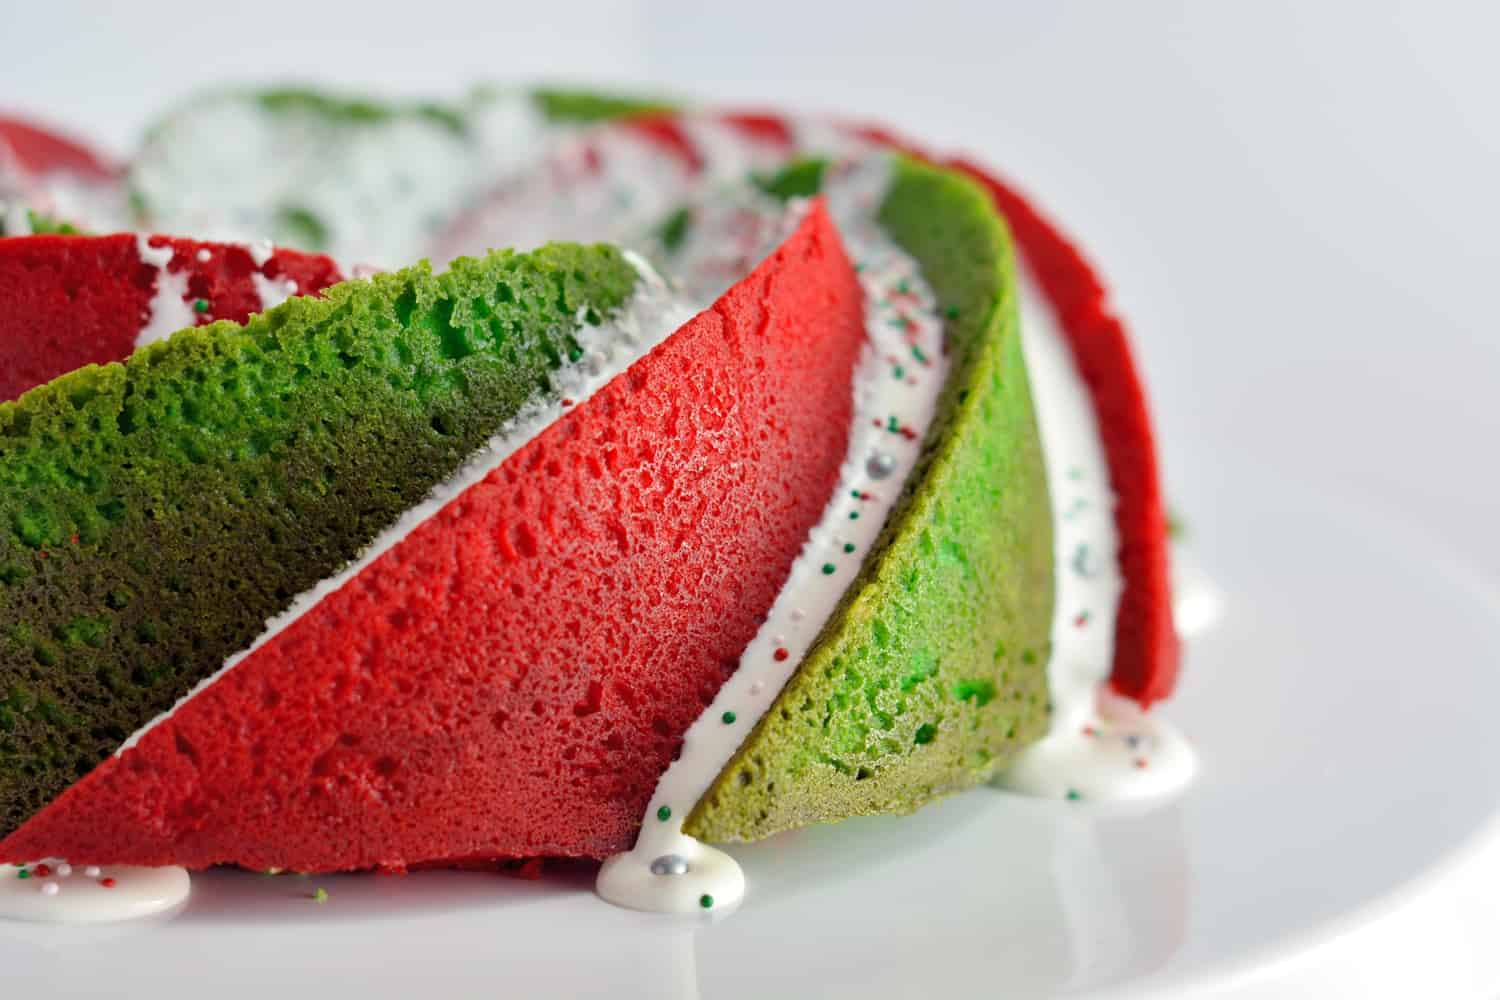 Christmas Bundt Cake A Festive Red And Green Holiday Cake